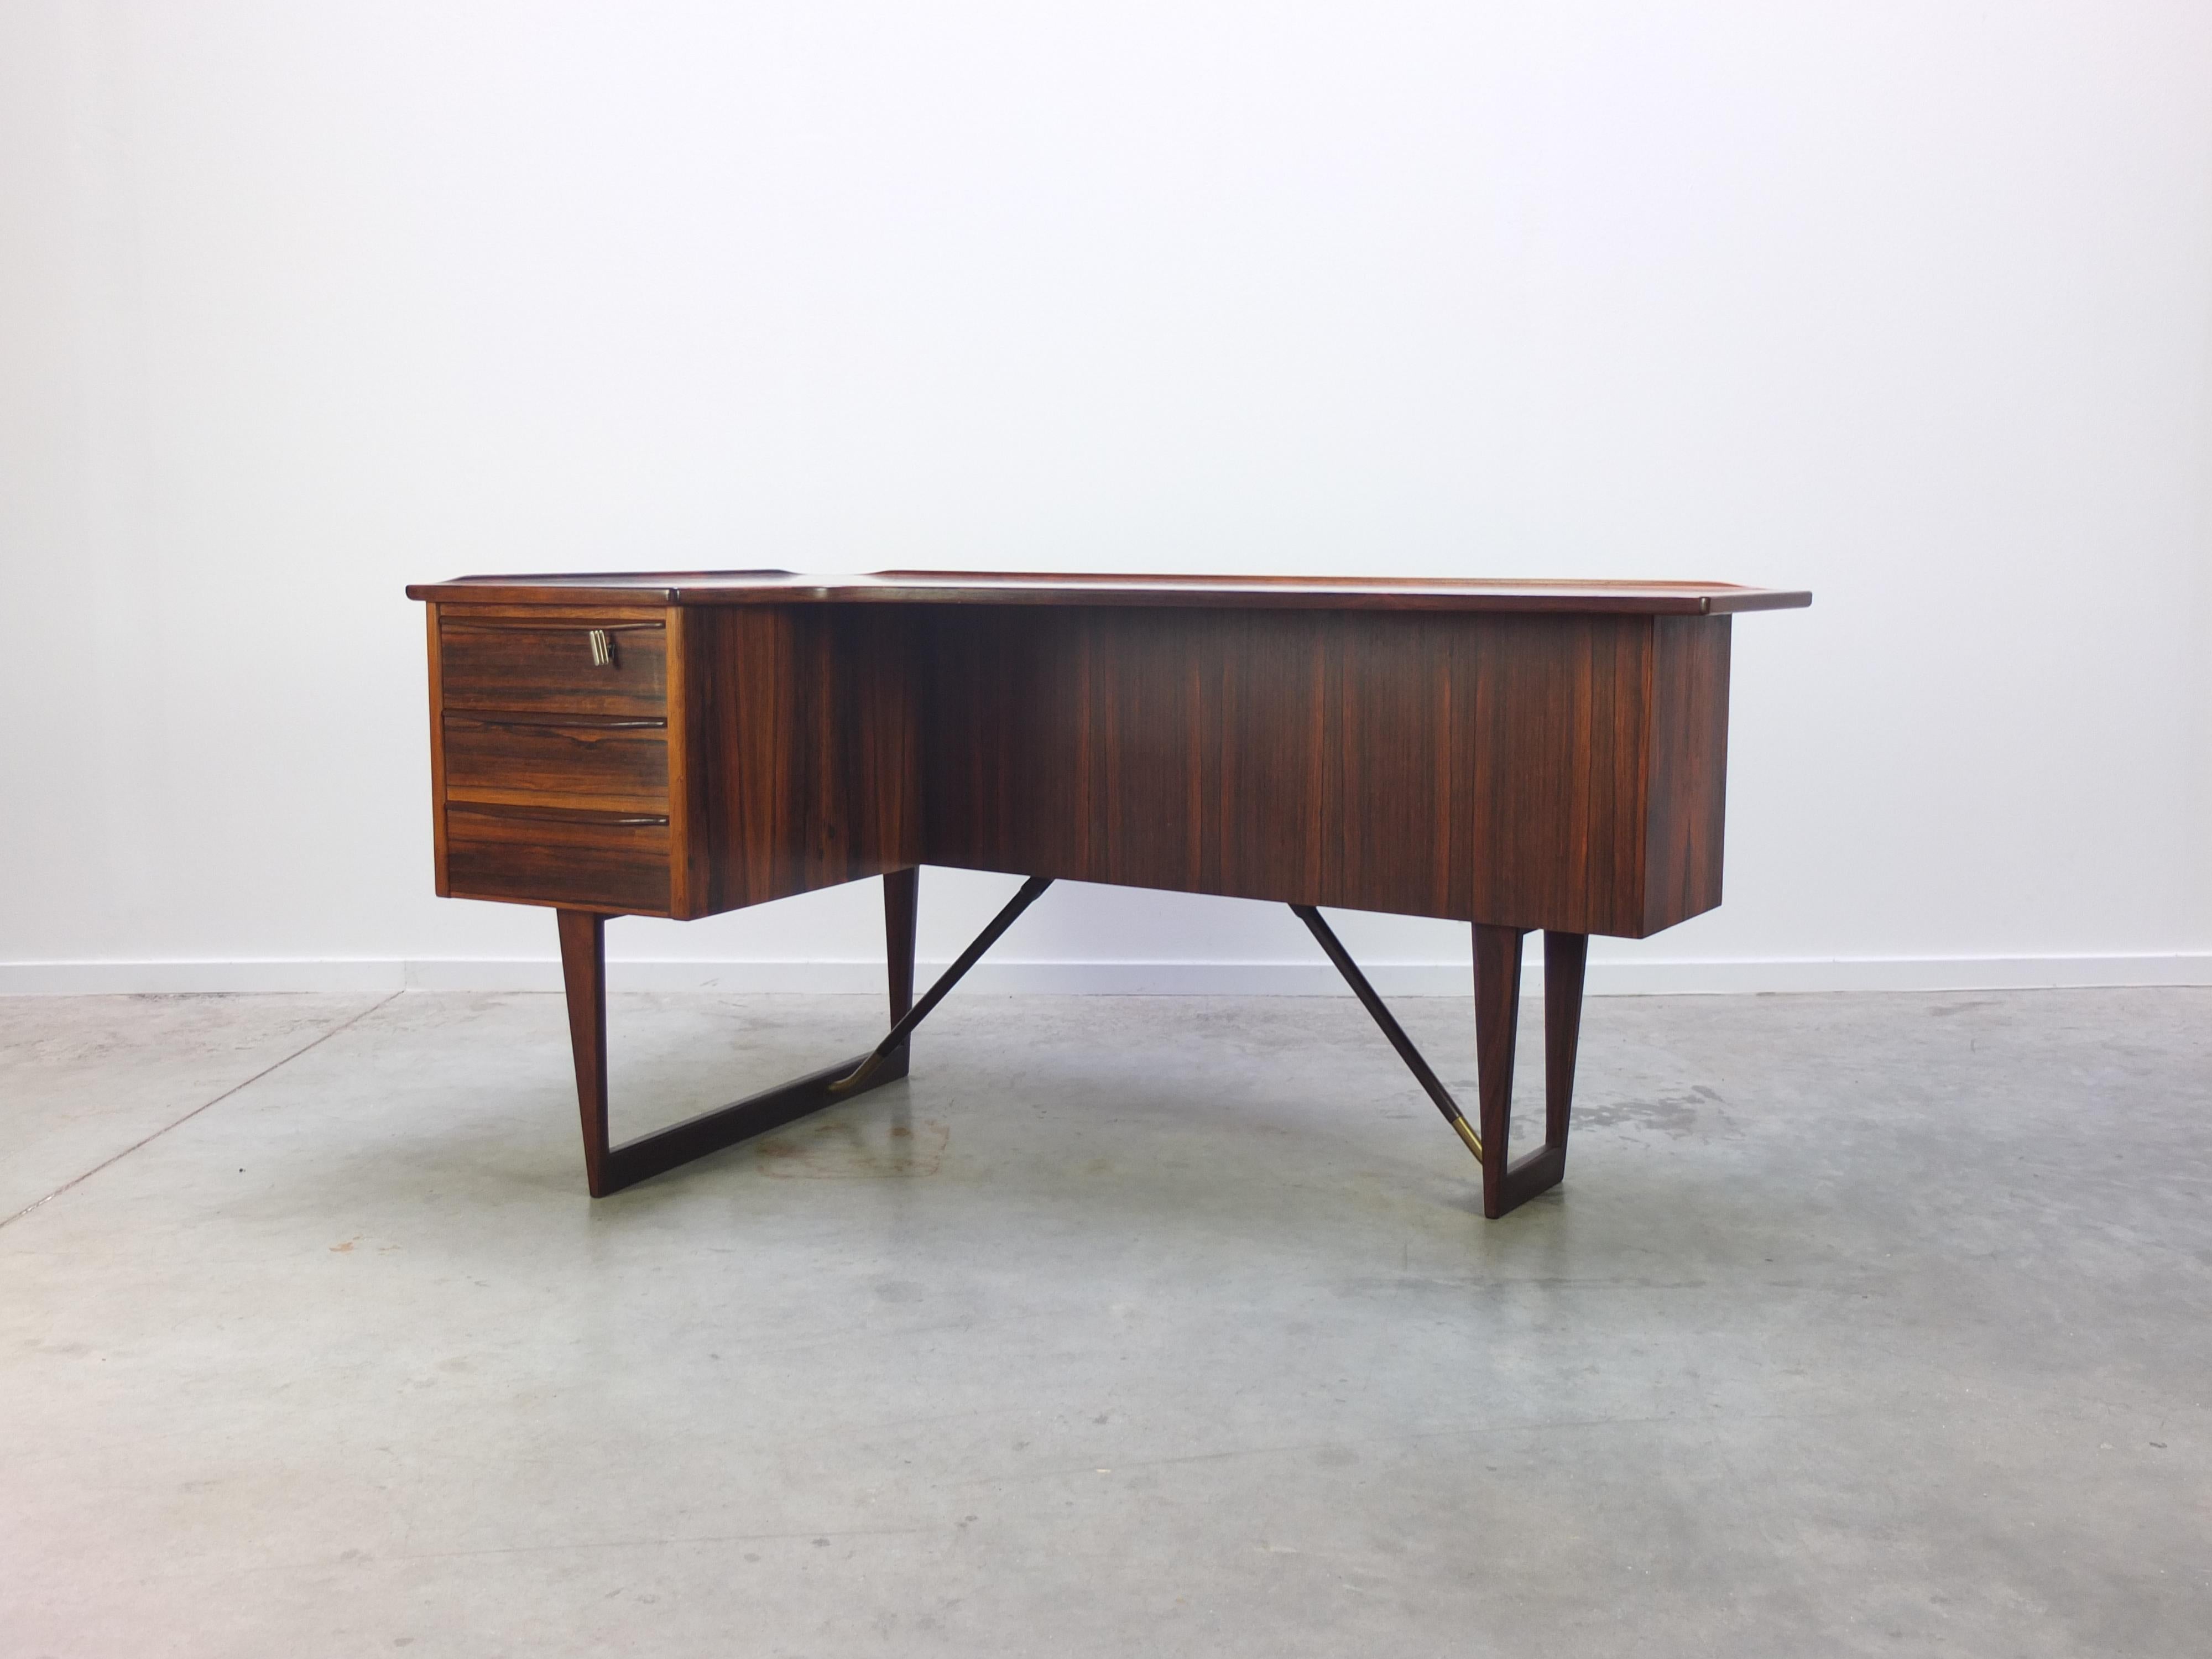 Magnificent ‘Boomerang’ desk designed by Peter Løvig Nielsen and produced by Løvig in Denmark, 1960s. A very nice and refined design with great details such as the shape of the top with raised edges. This desk is made of beautiful Brazilian Rosewood